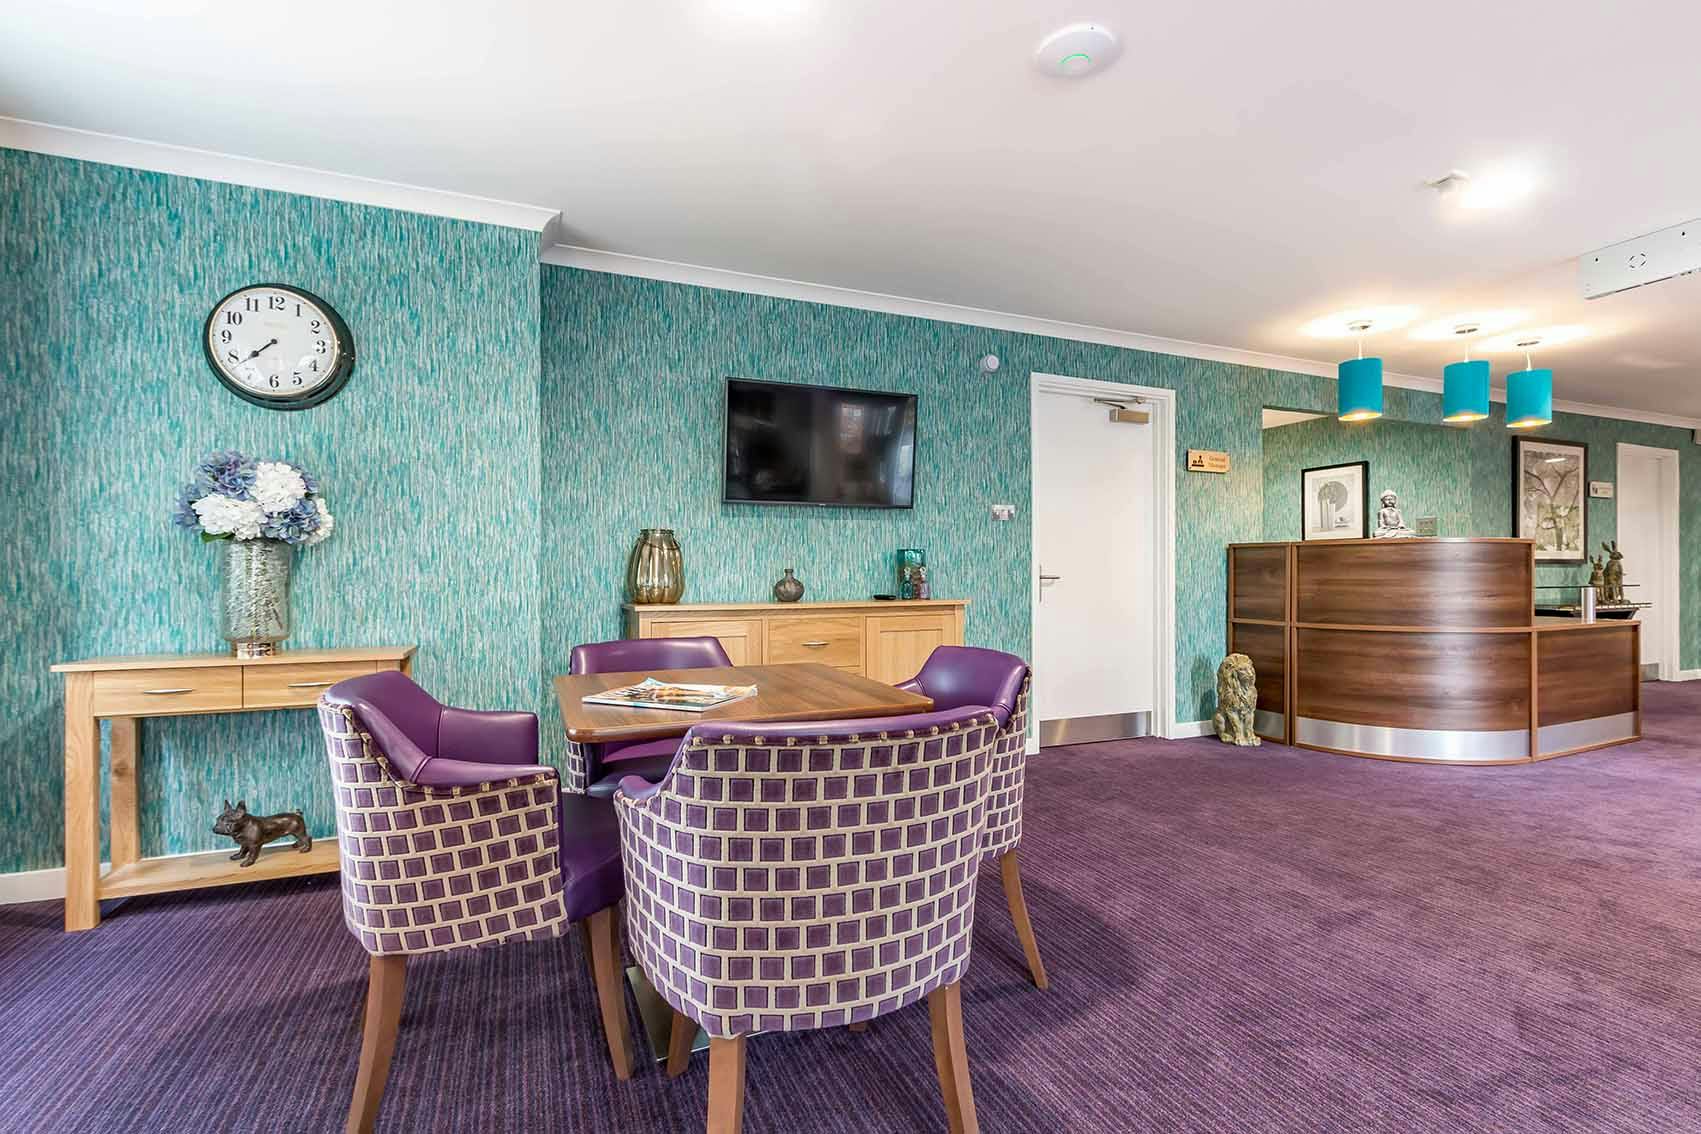 Reception at Shelburne Lodge Care Home in High Wycombe, Buckinghamshire